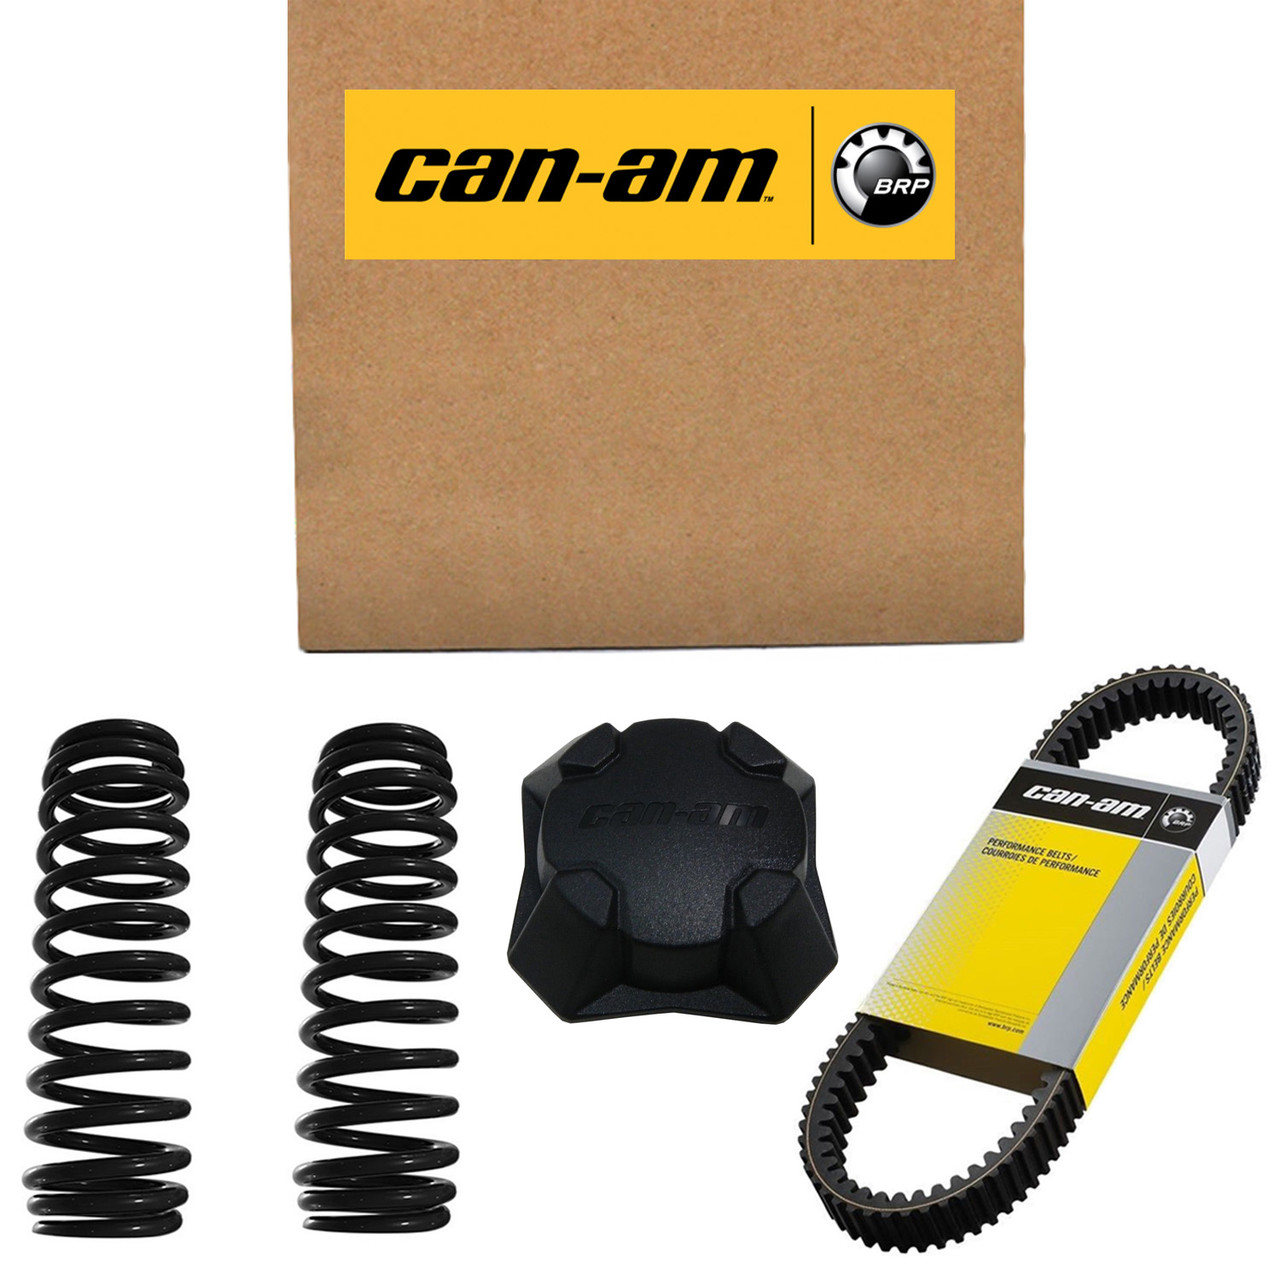 Can-Am New OEM Front Fender Kit, 715004133